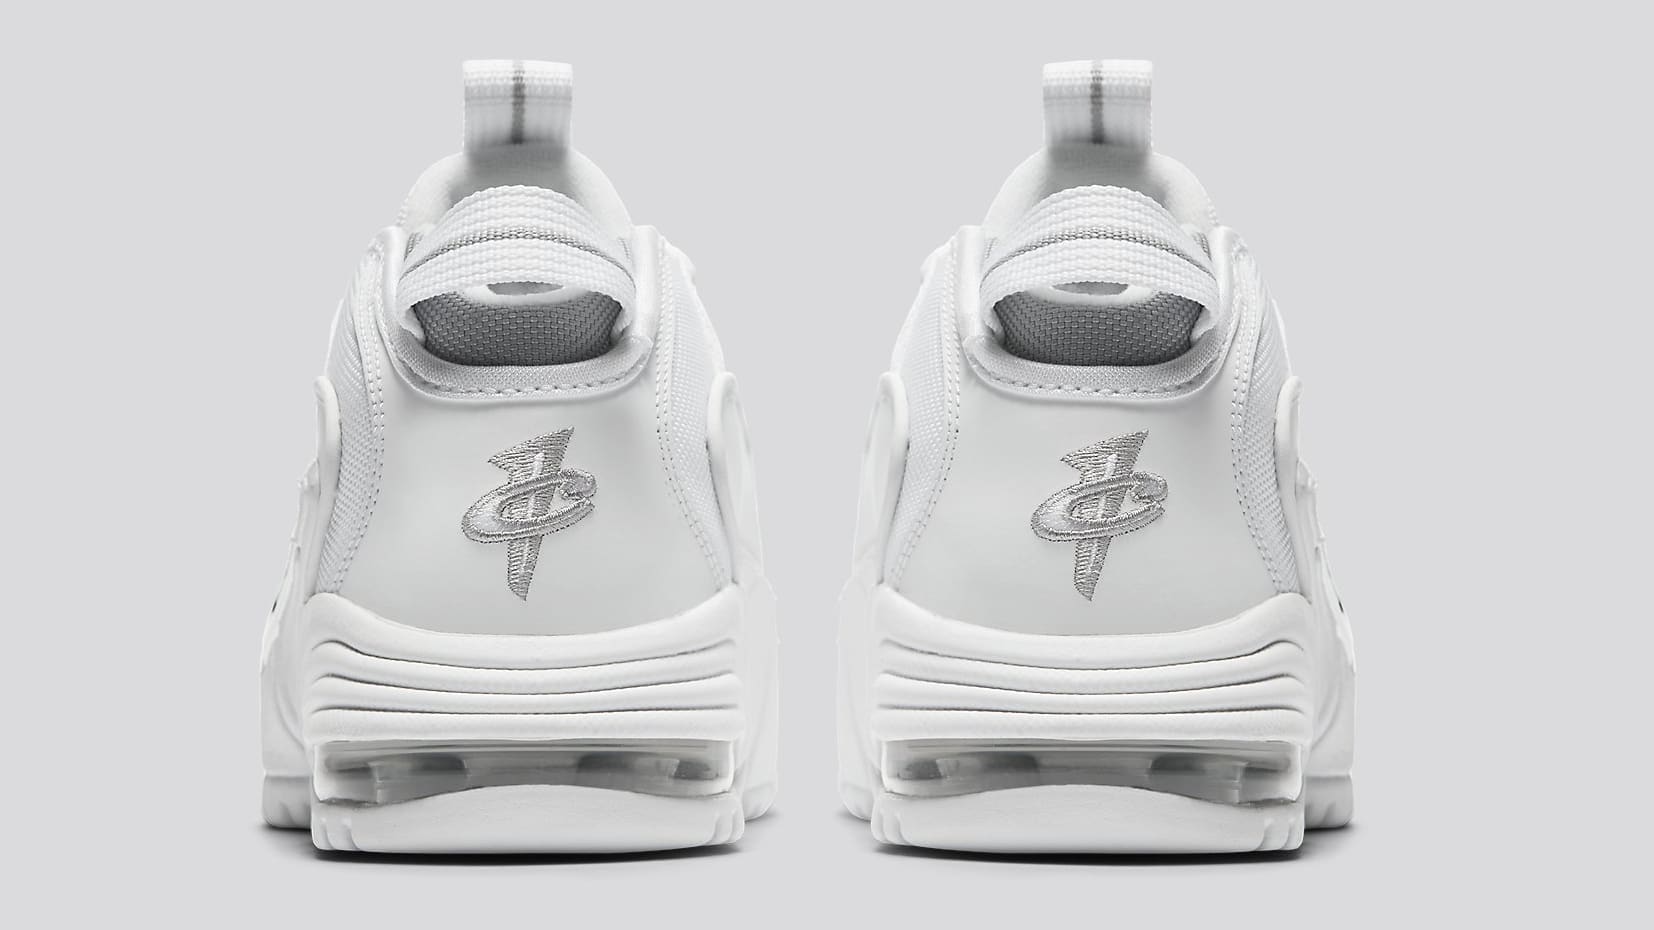 Nike Air Max Penny 1 'White Metallic' Release Date 685153-100 | Sole ...